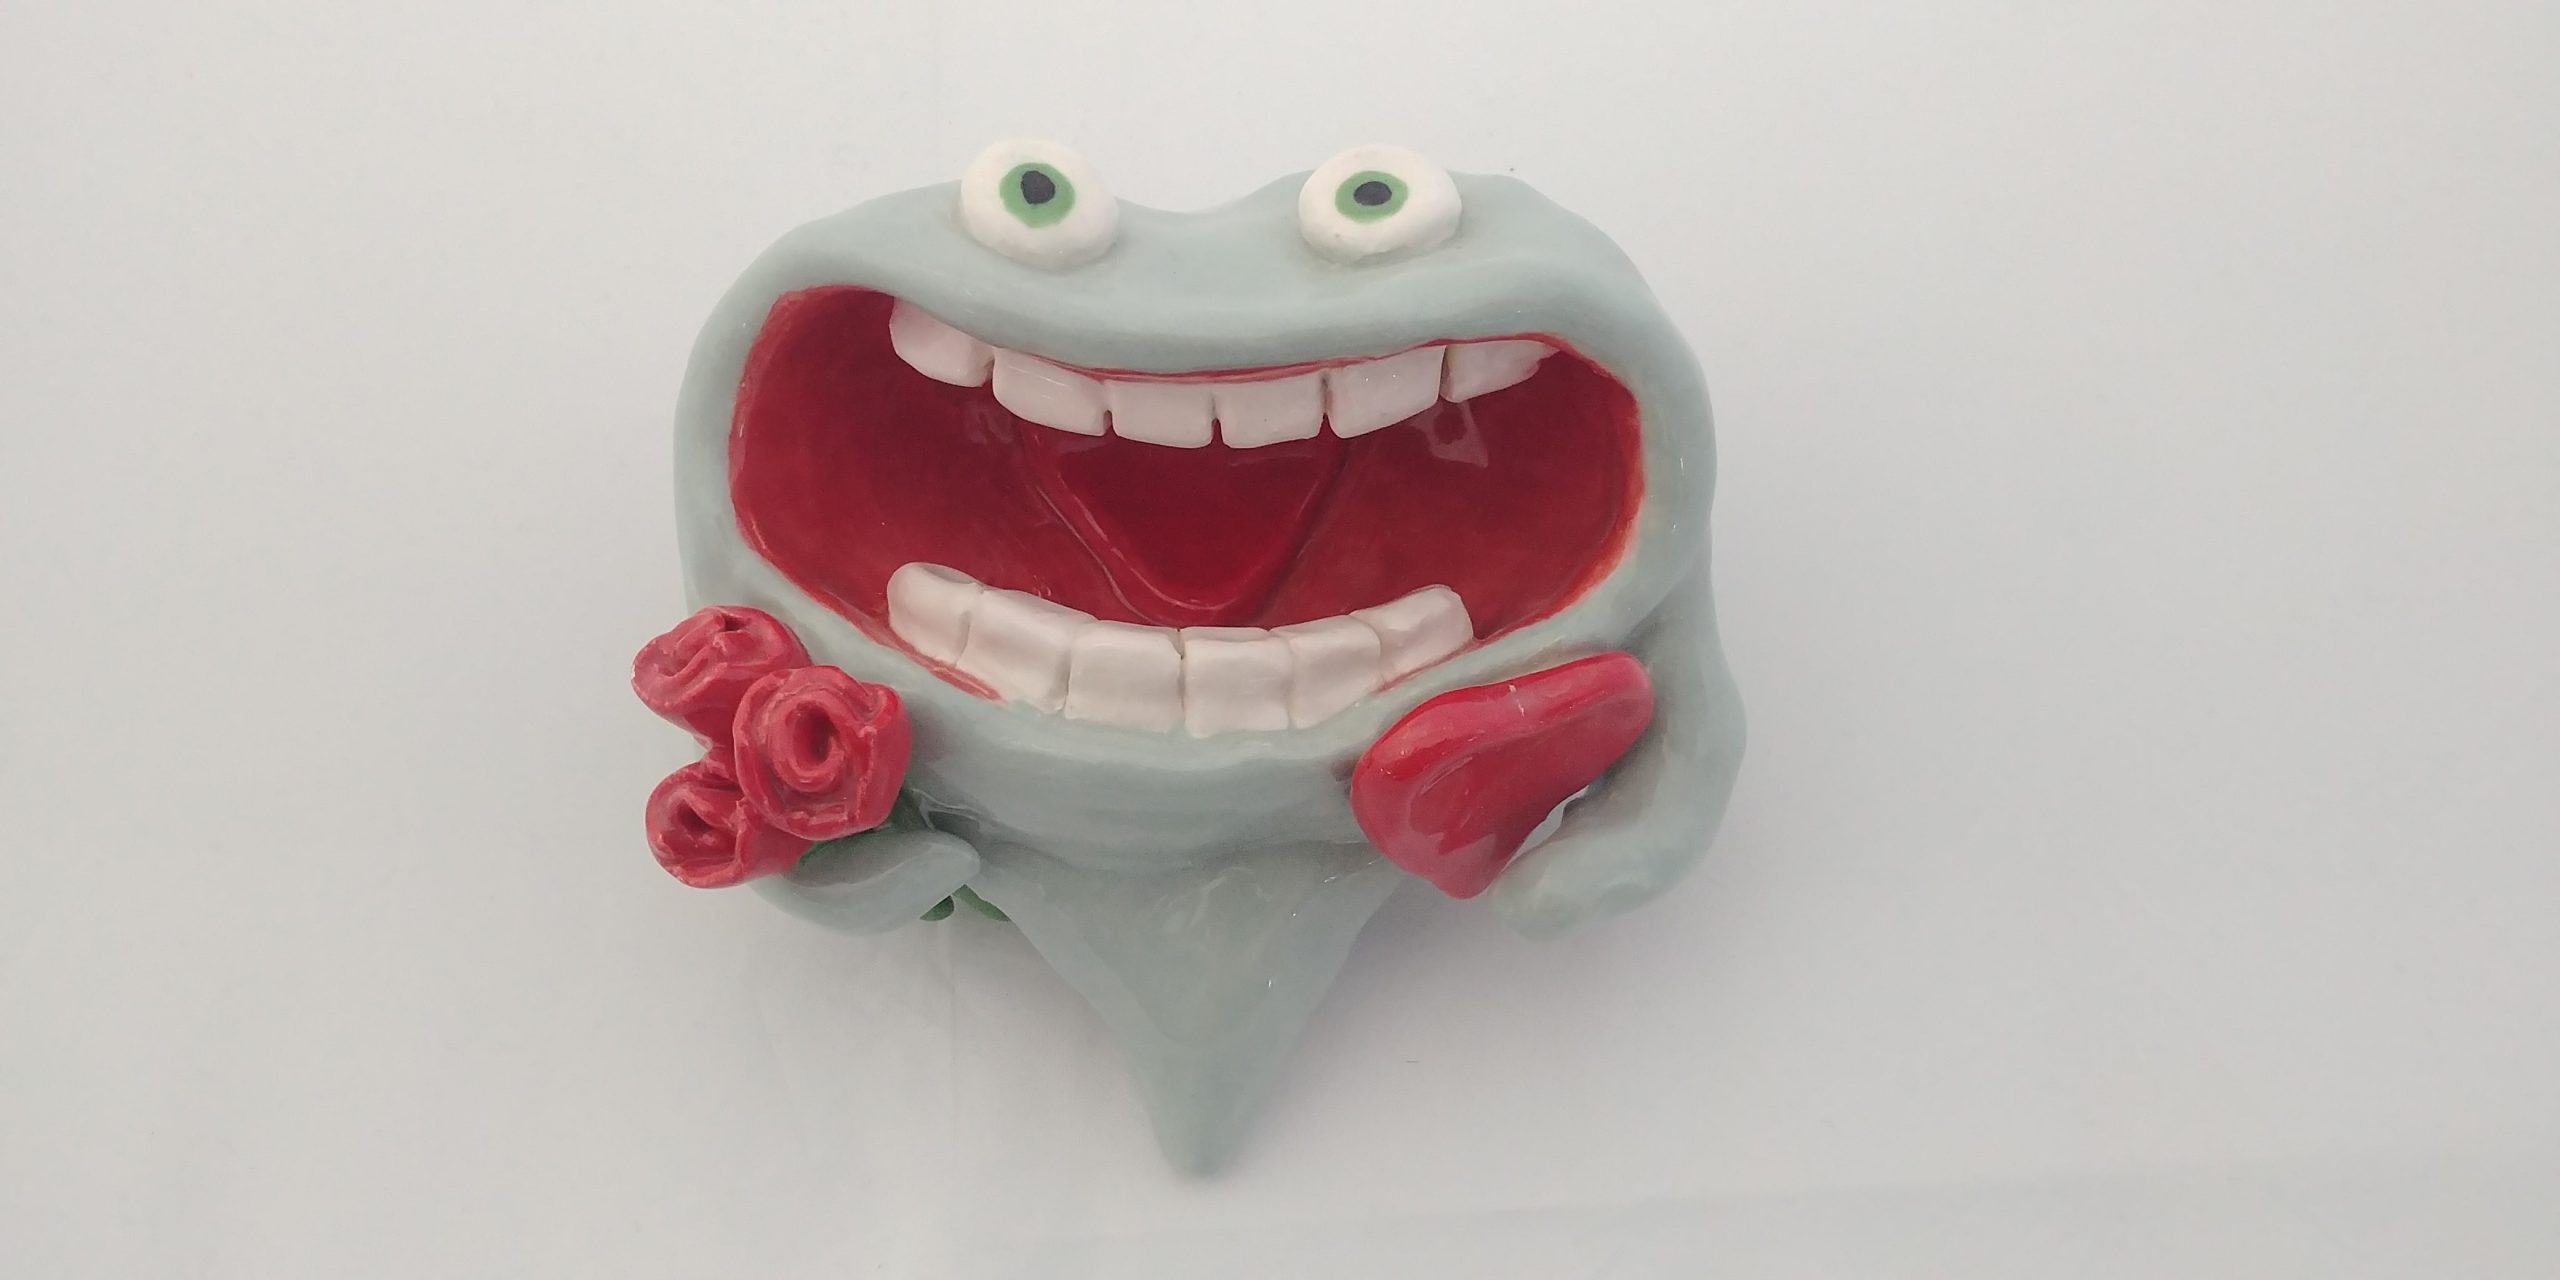 Intro to Ceramic Clay Modeling - Love Monster